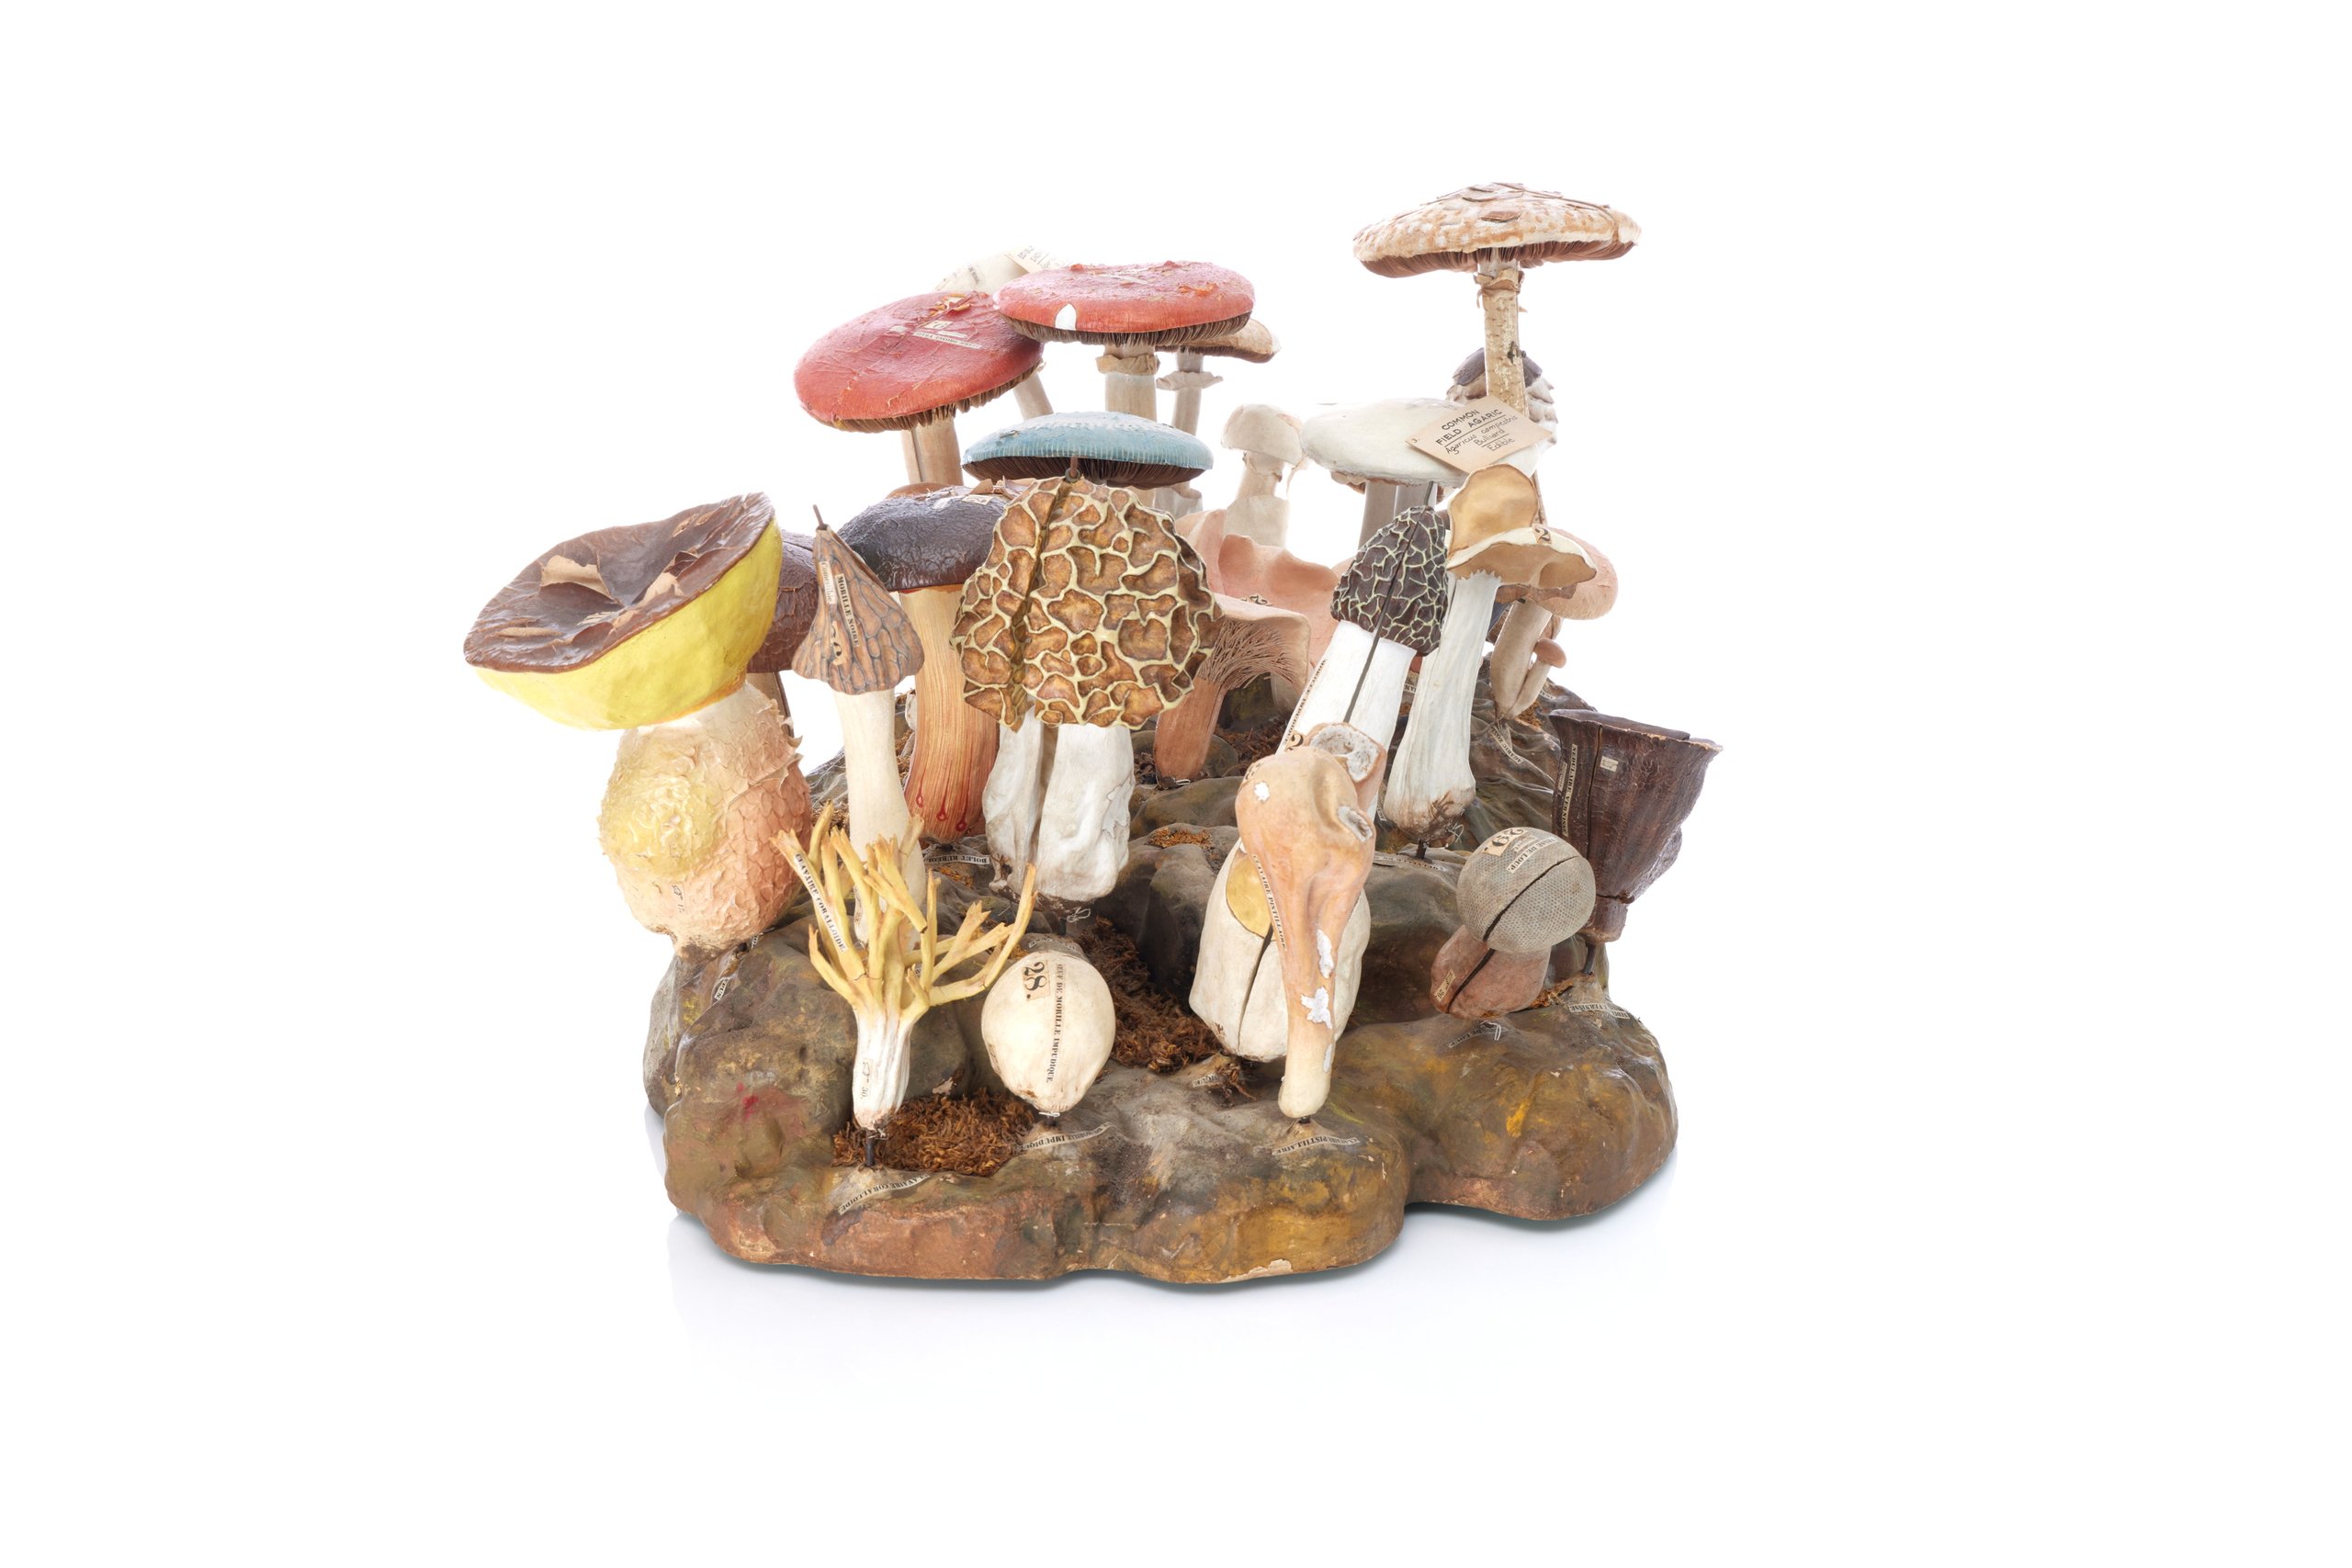 Model showing edible and inedible fungi by Dr Louis Auzoux